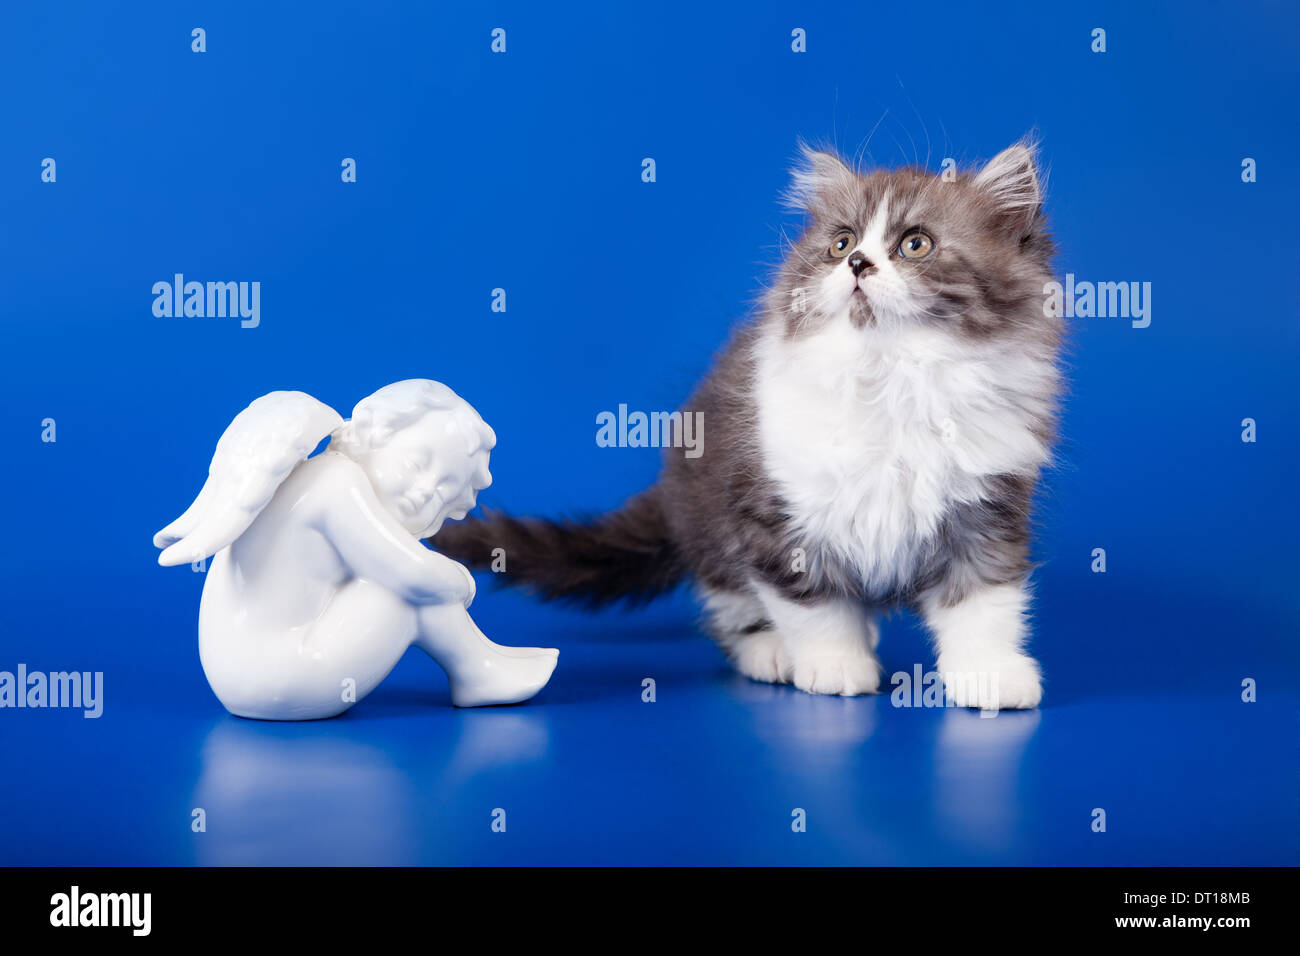 Scottish purebred cat looking up on blue background Stock Photo